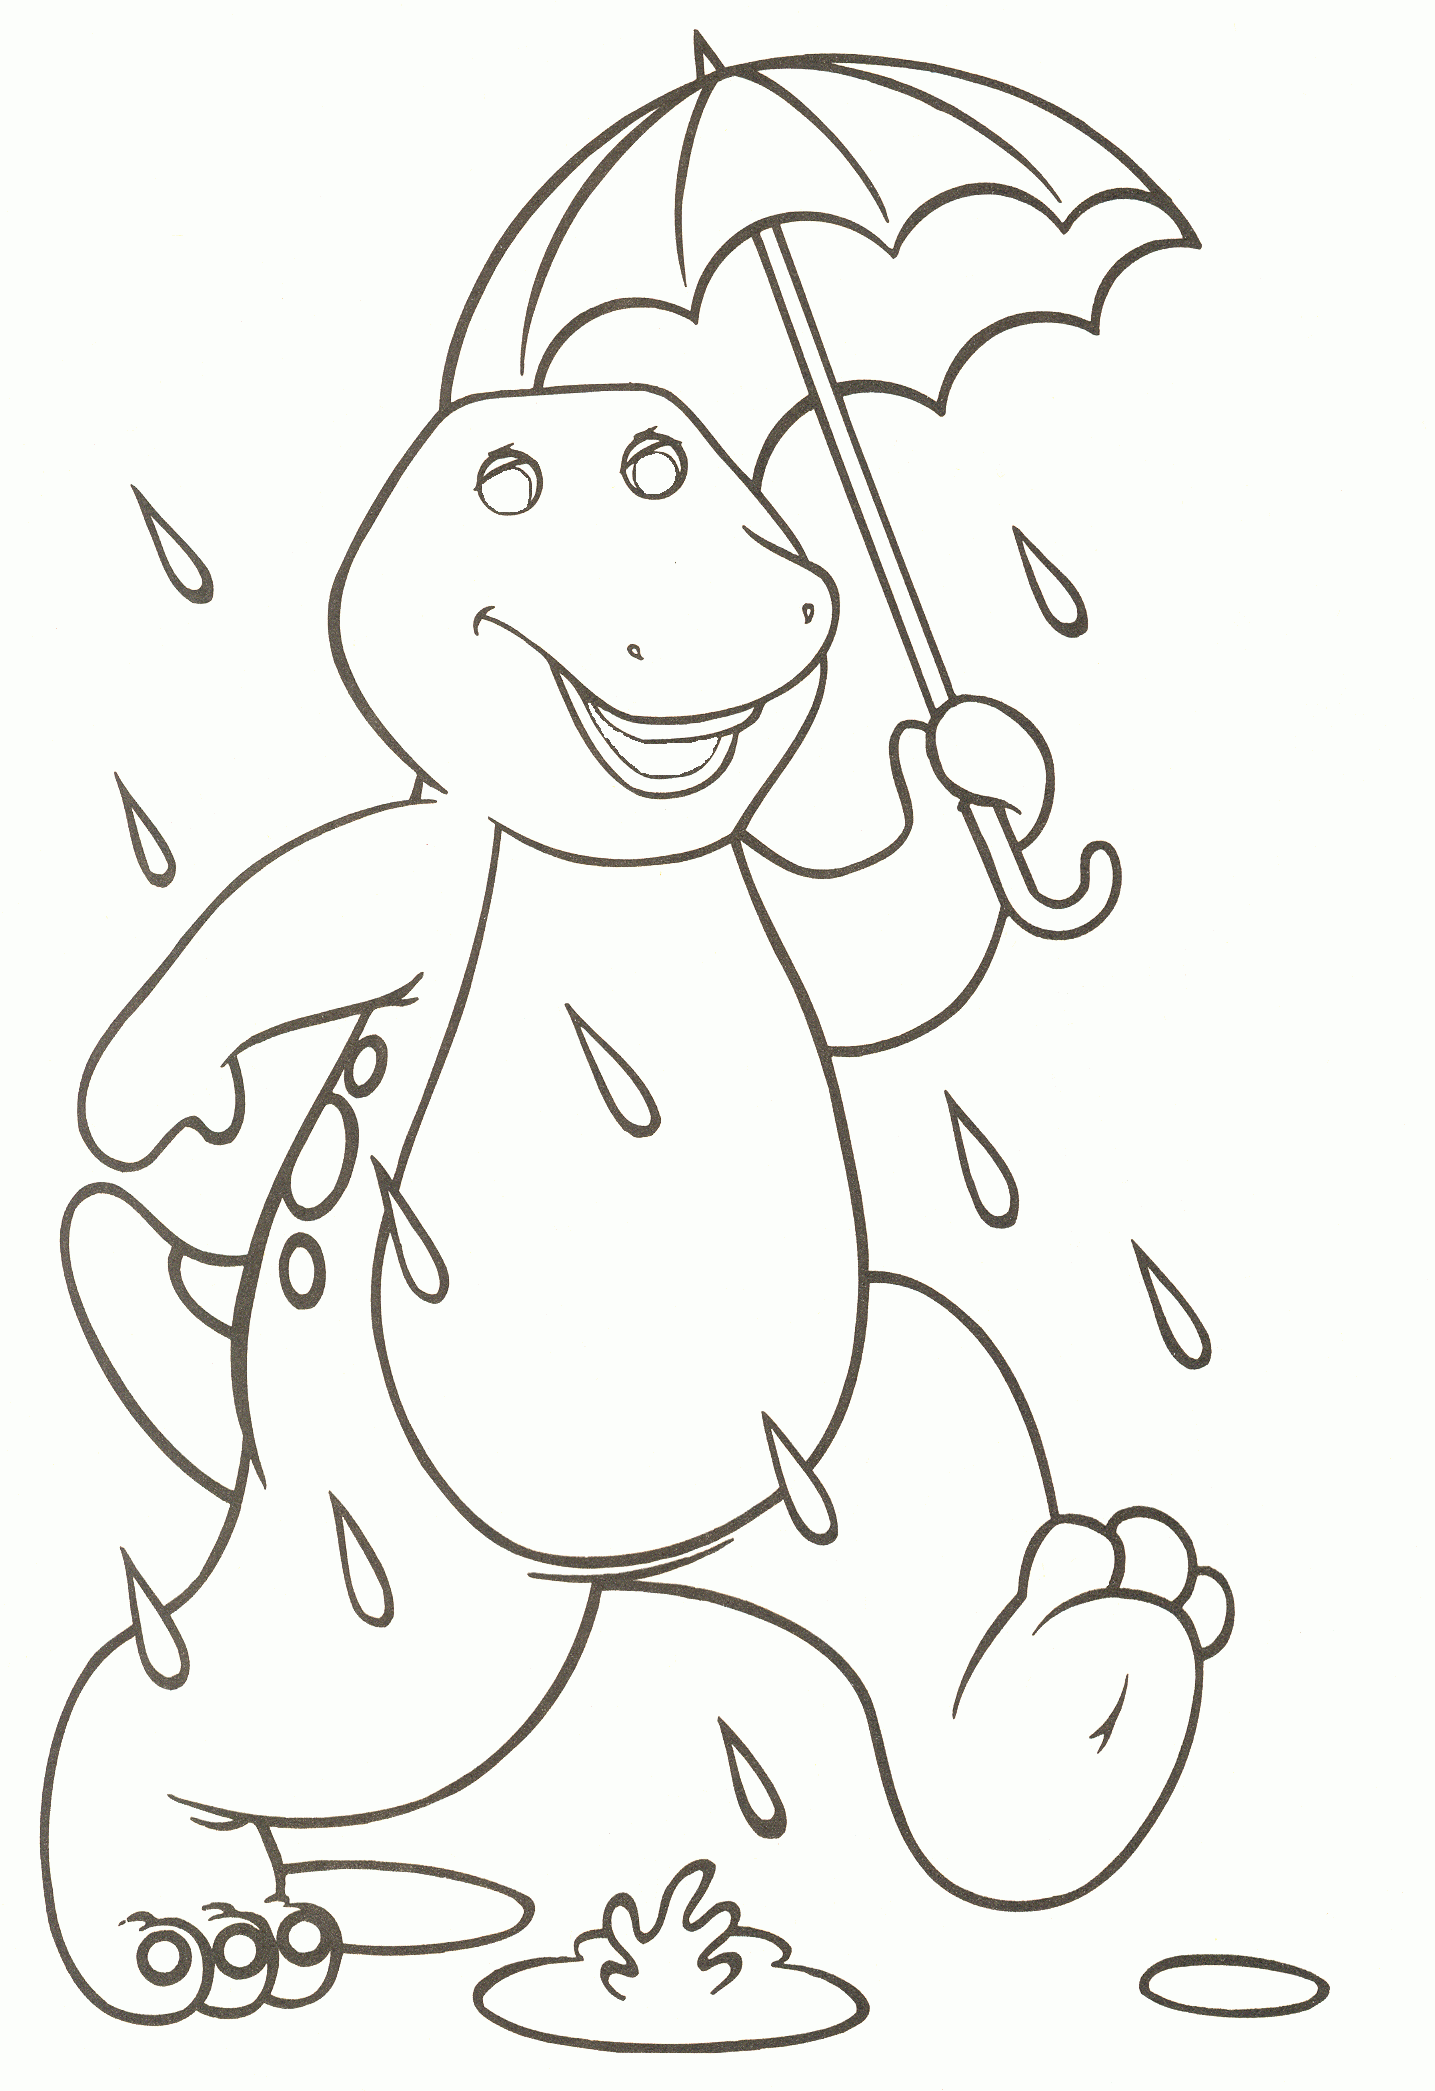 Barney coloring pages to download and print for free